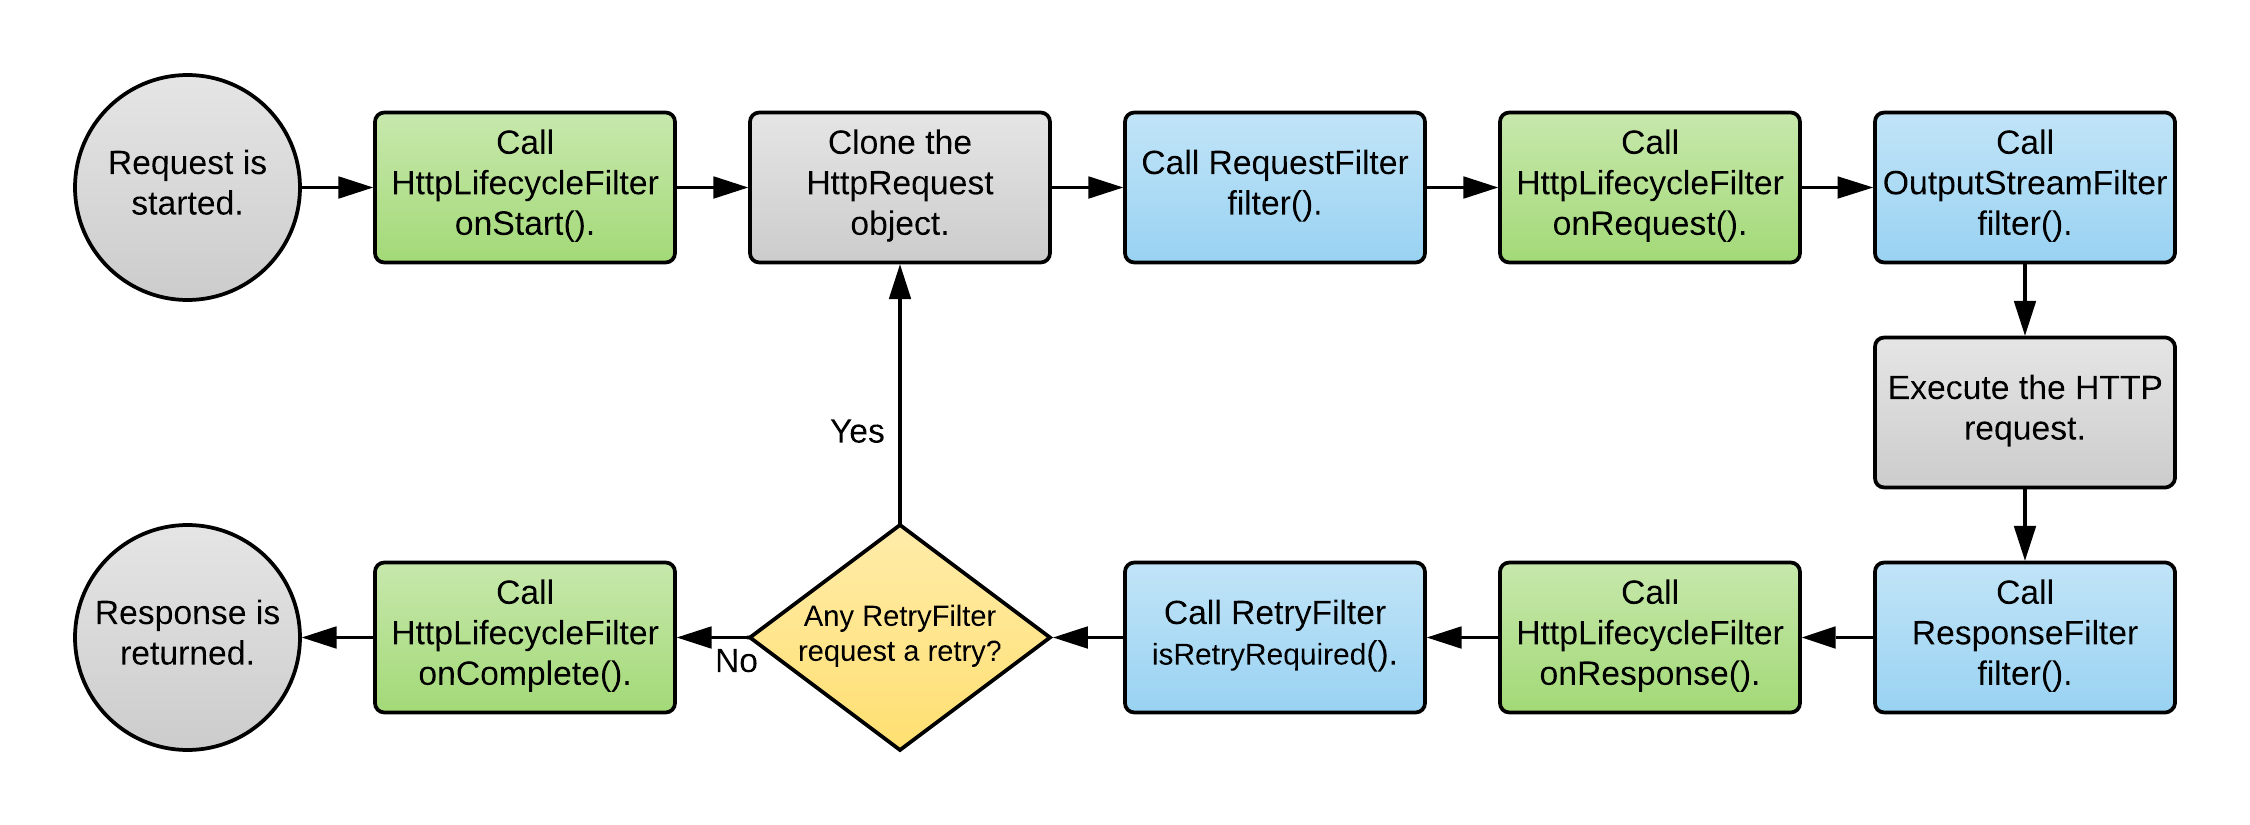 HTTP Request Filter Chain